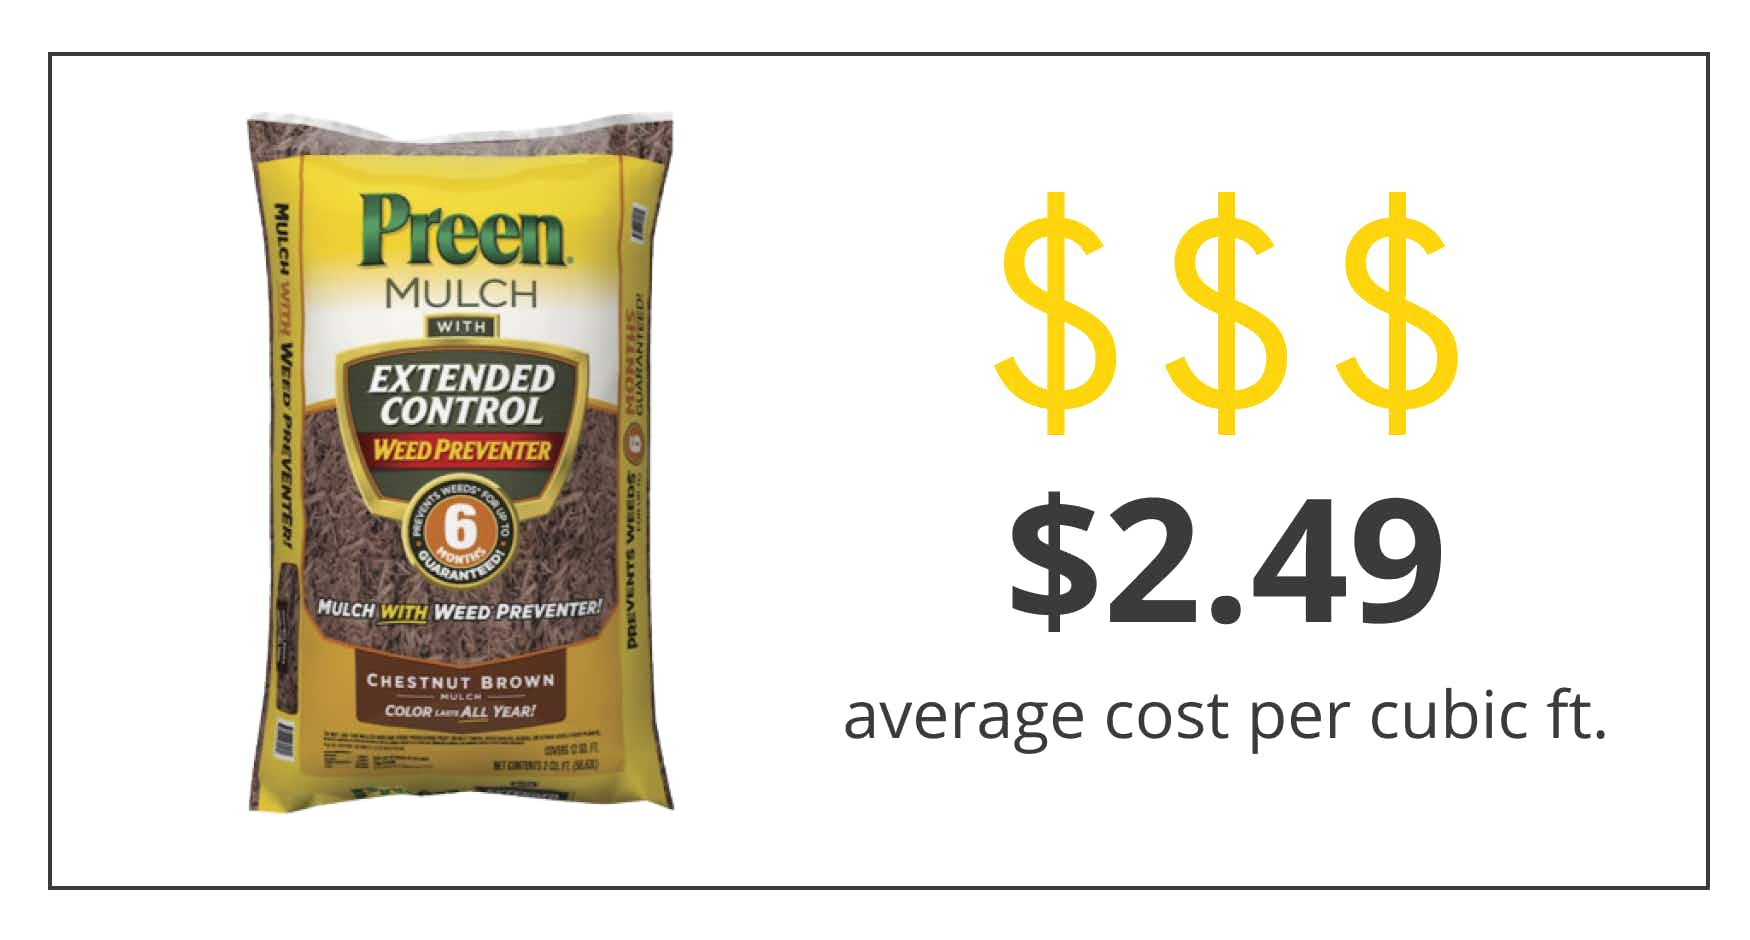 a graphic showing preen mulch from lowe's has an average cost of $2.49 per cubic foot